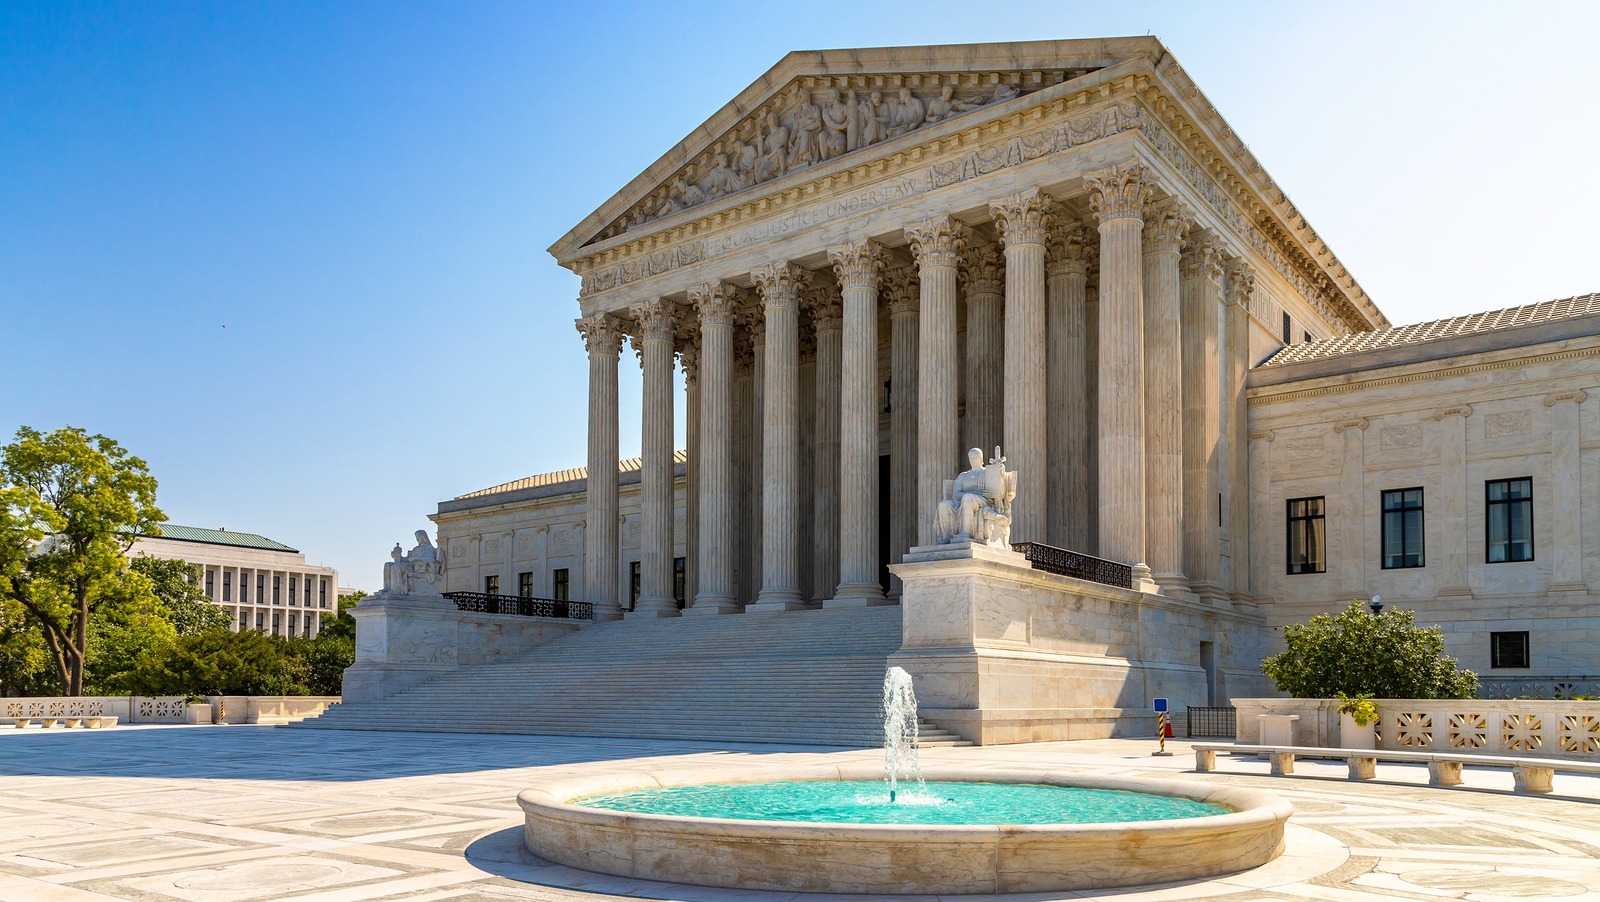 Why There Are No Term Limits For Supreme Court Justices